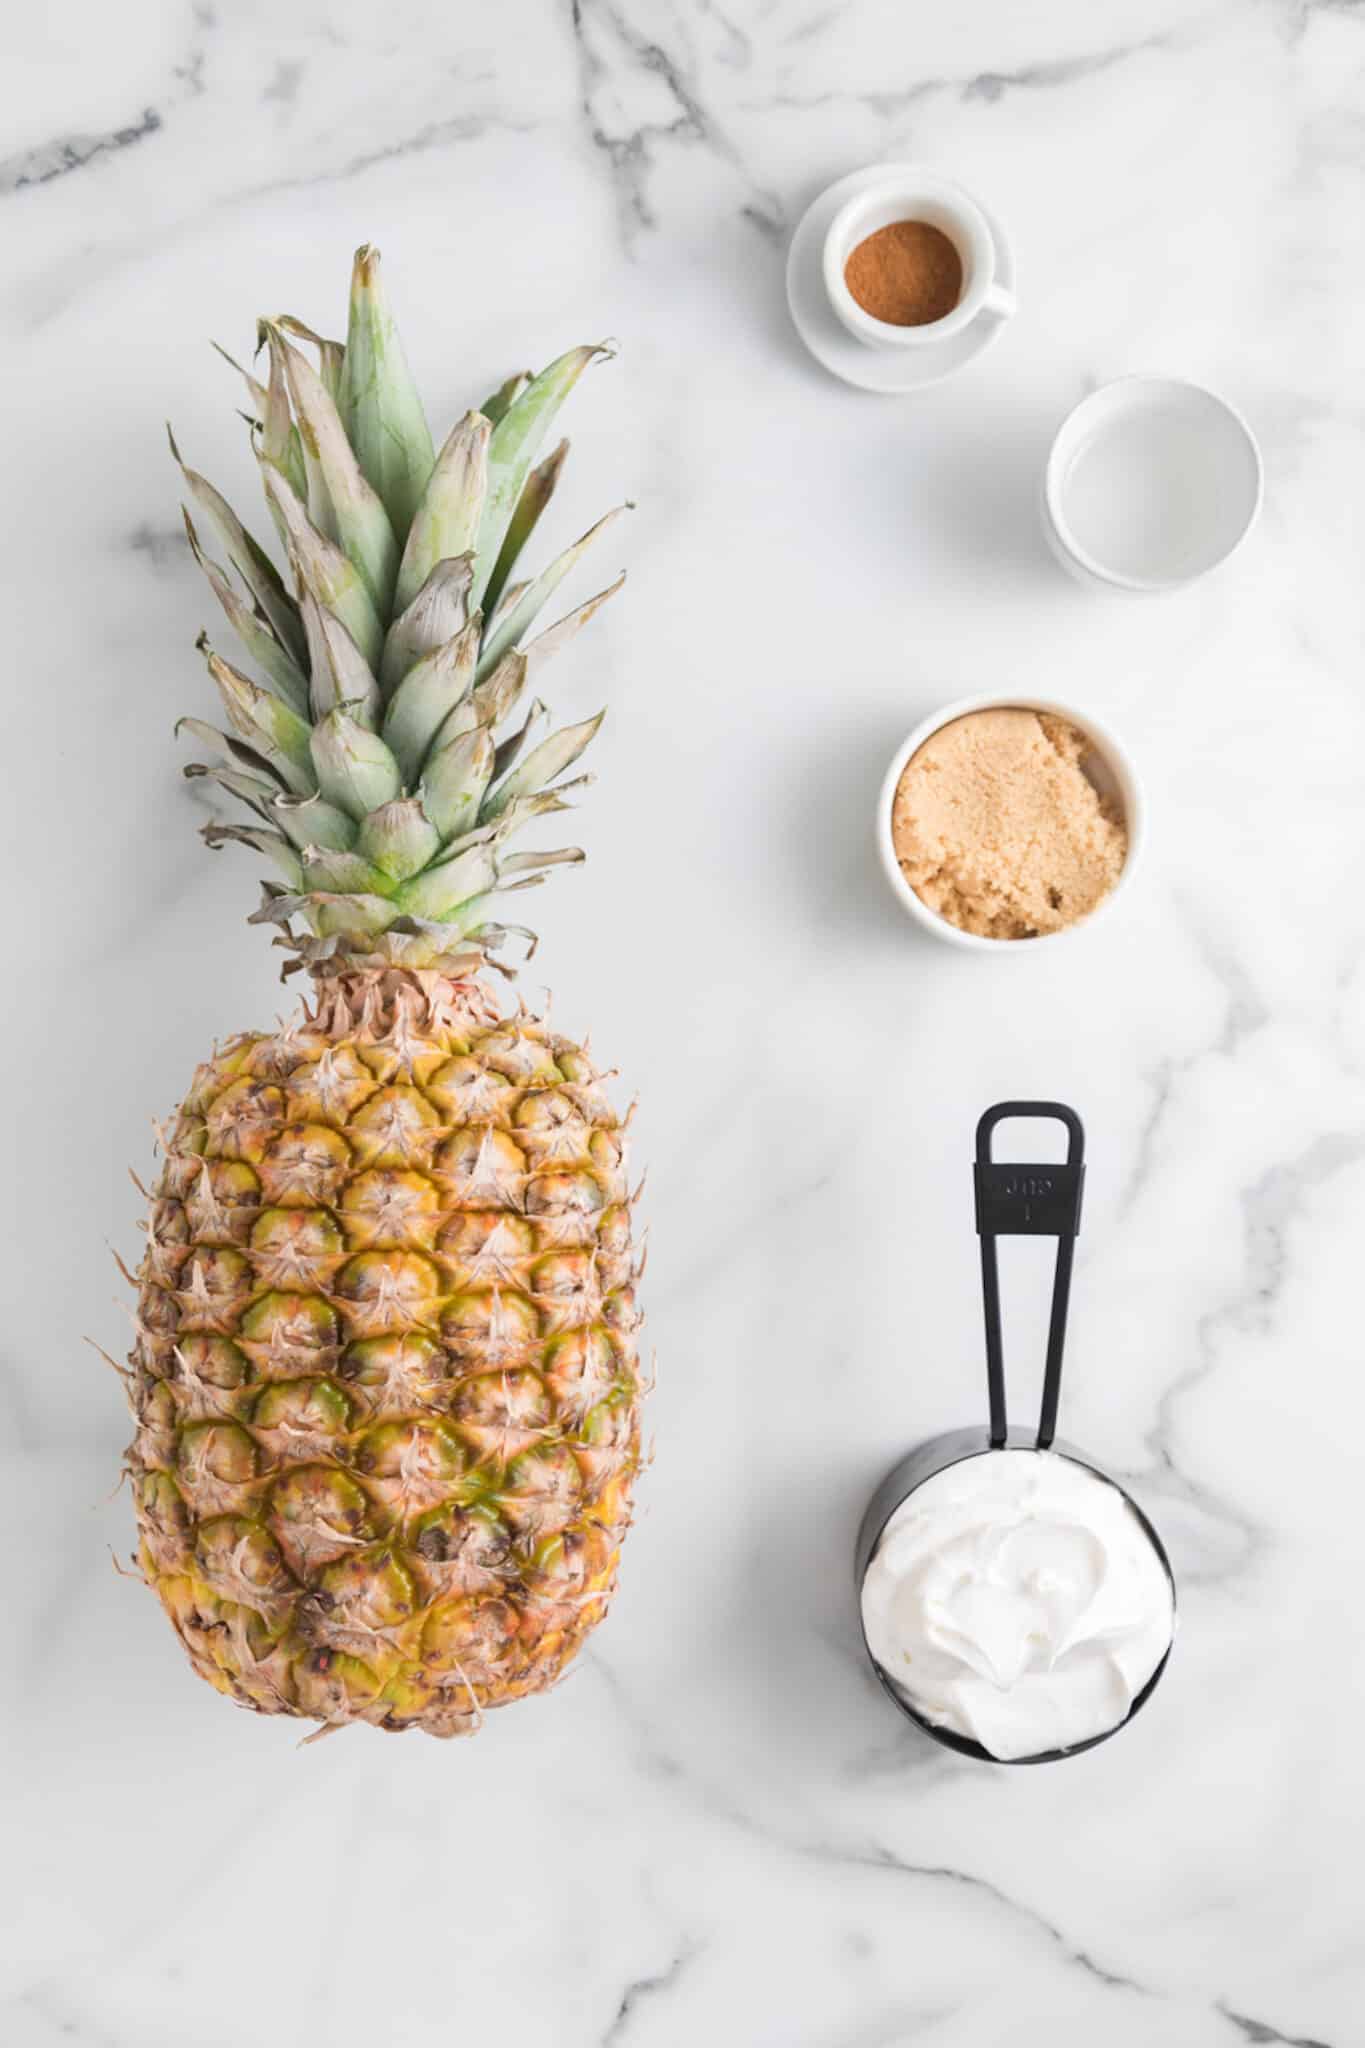 https://www.cleaneatingkitchen.com/wp-content/uploads/2022/08/Air-Fryer-Pineapple-Ingredients-scaled.jpg